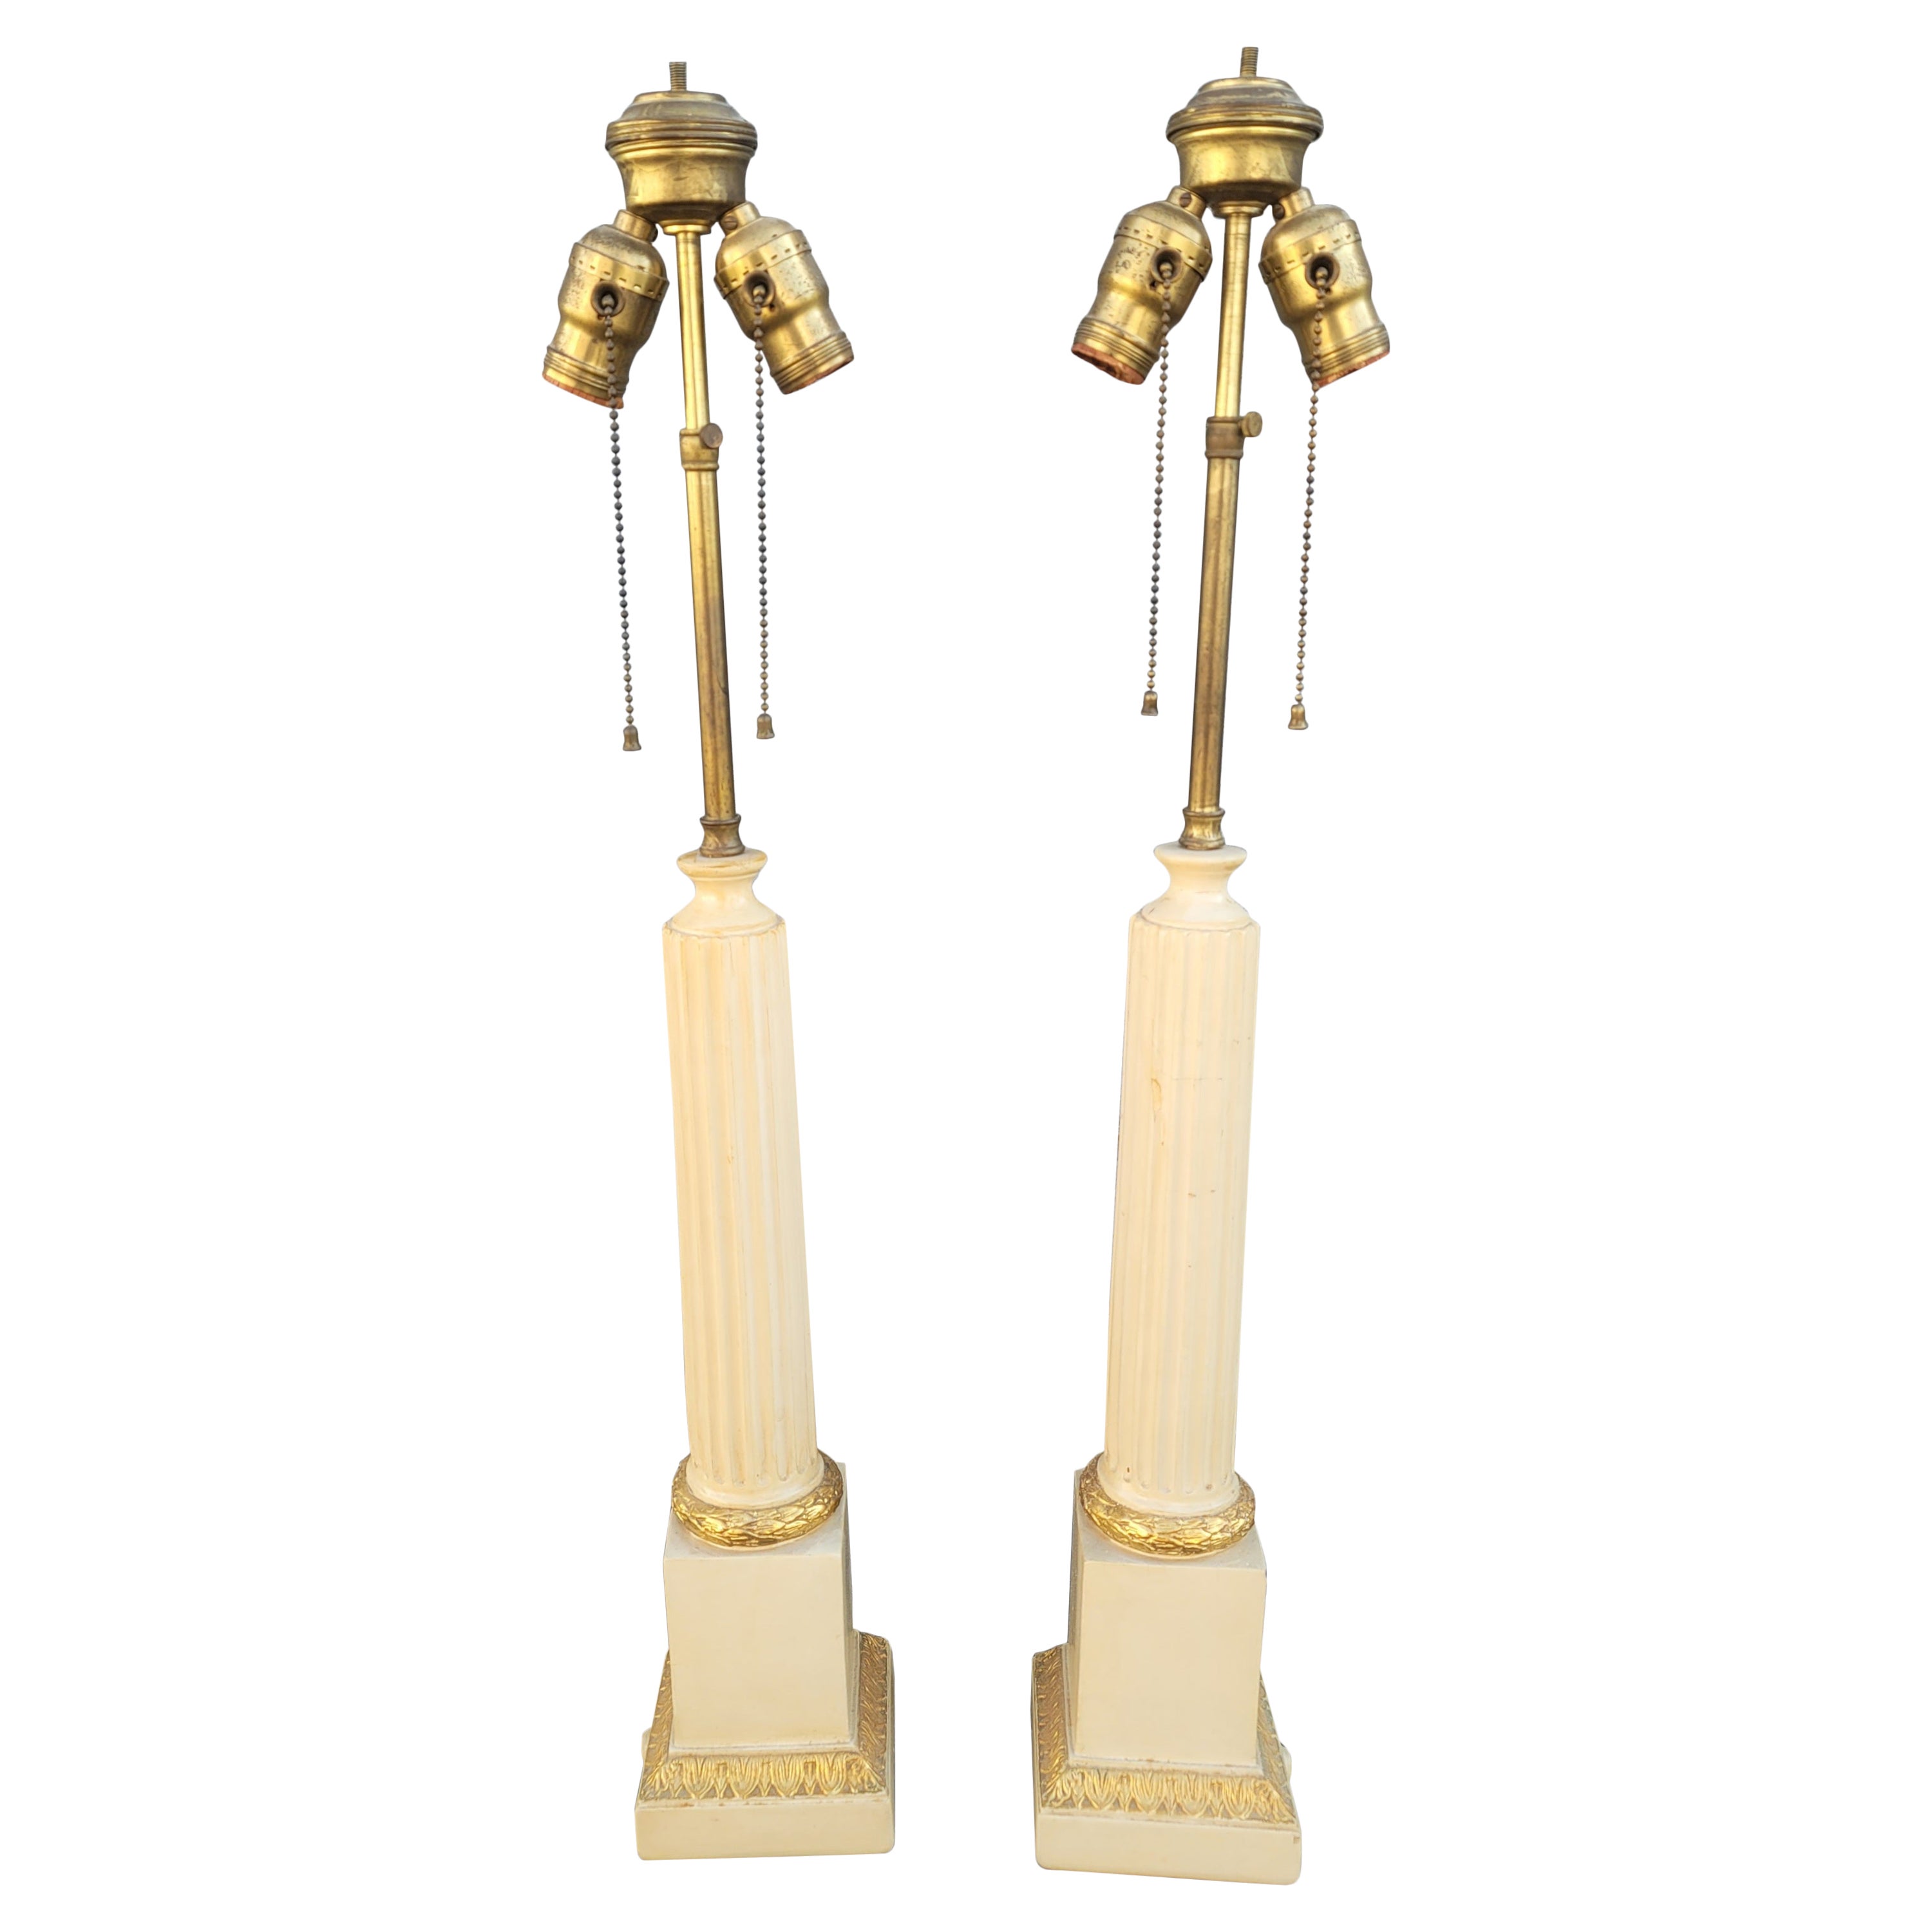 A Pair of Italian Art Deco Patinated and Gilt Ornate Plaster Tower Table Lamps For Sale